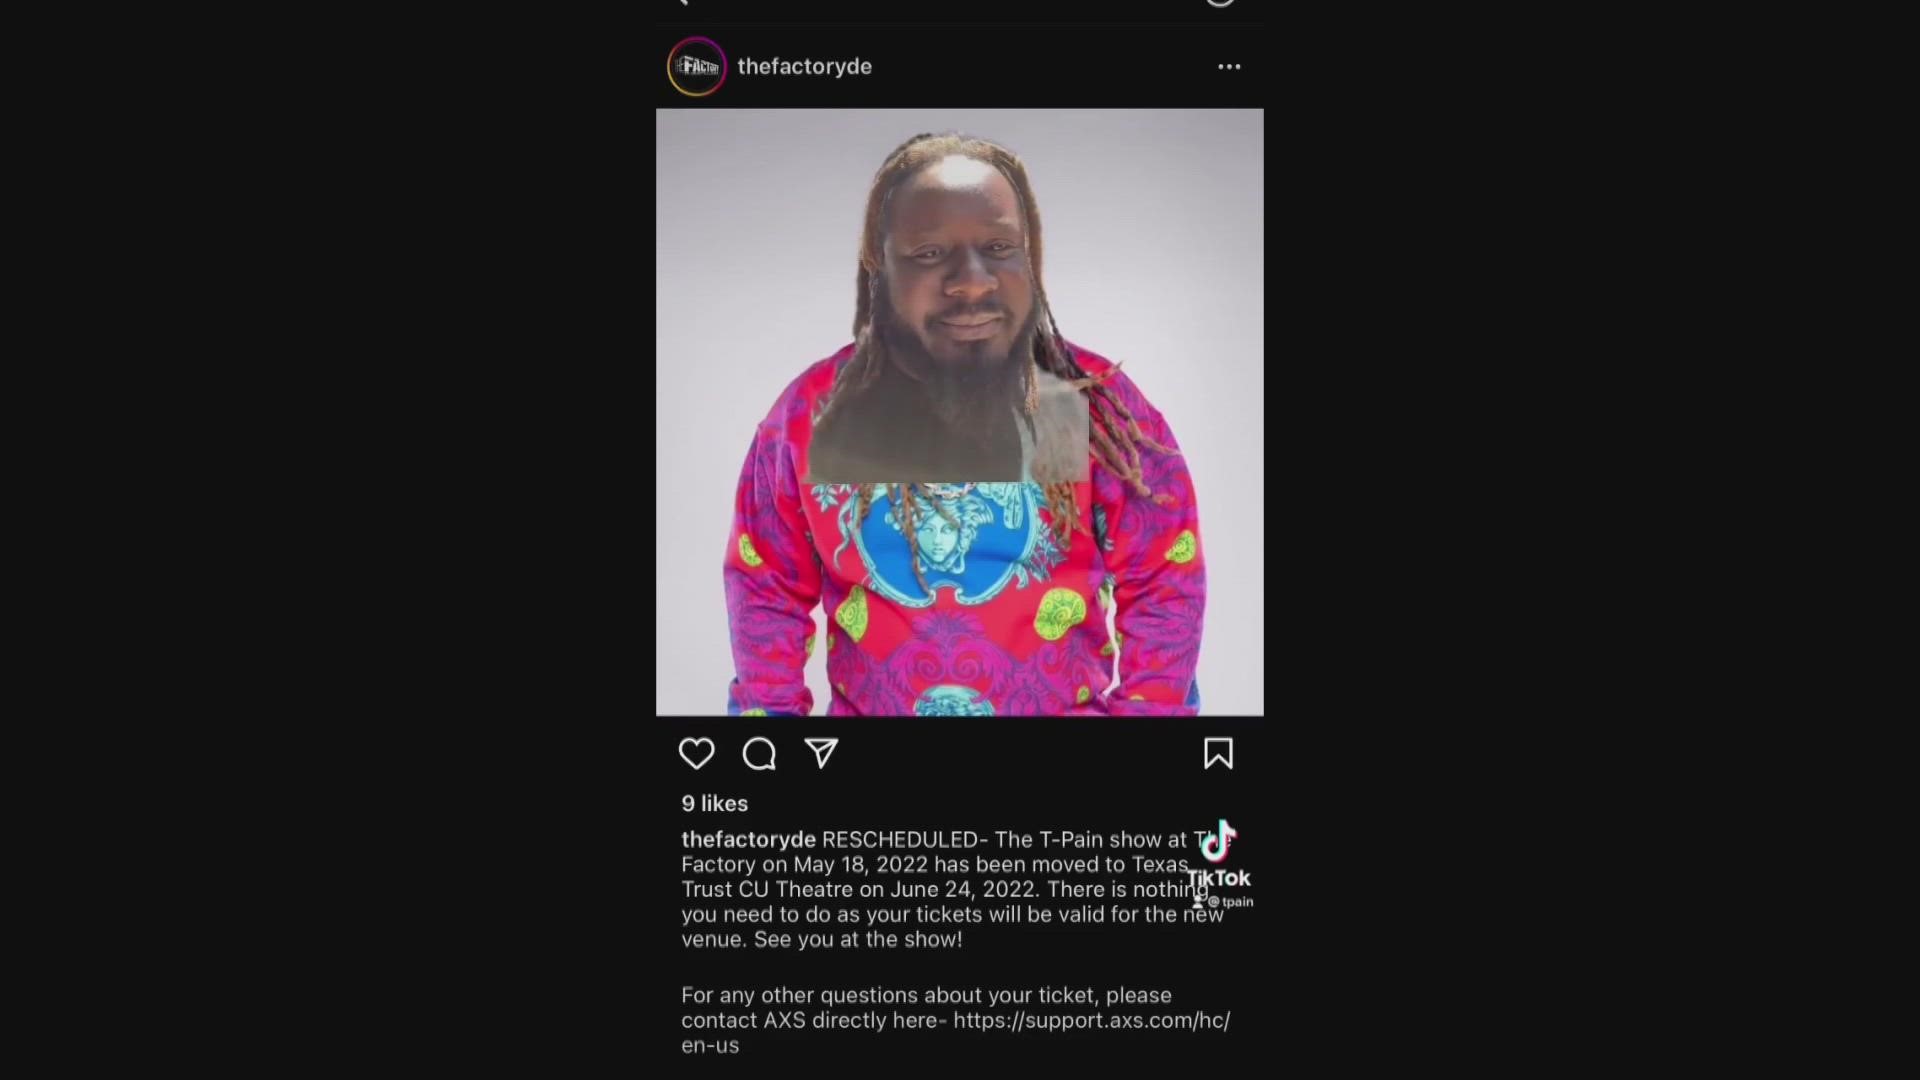 Last month, T-Pain made headlines after he complained in a TikTok video about his Dallas show selling only 26% of available tickets.